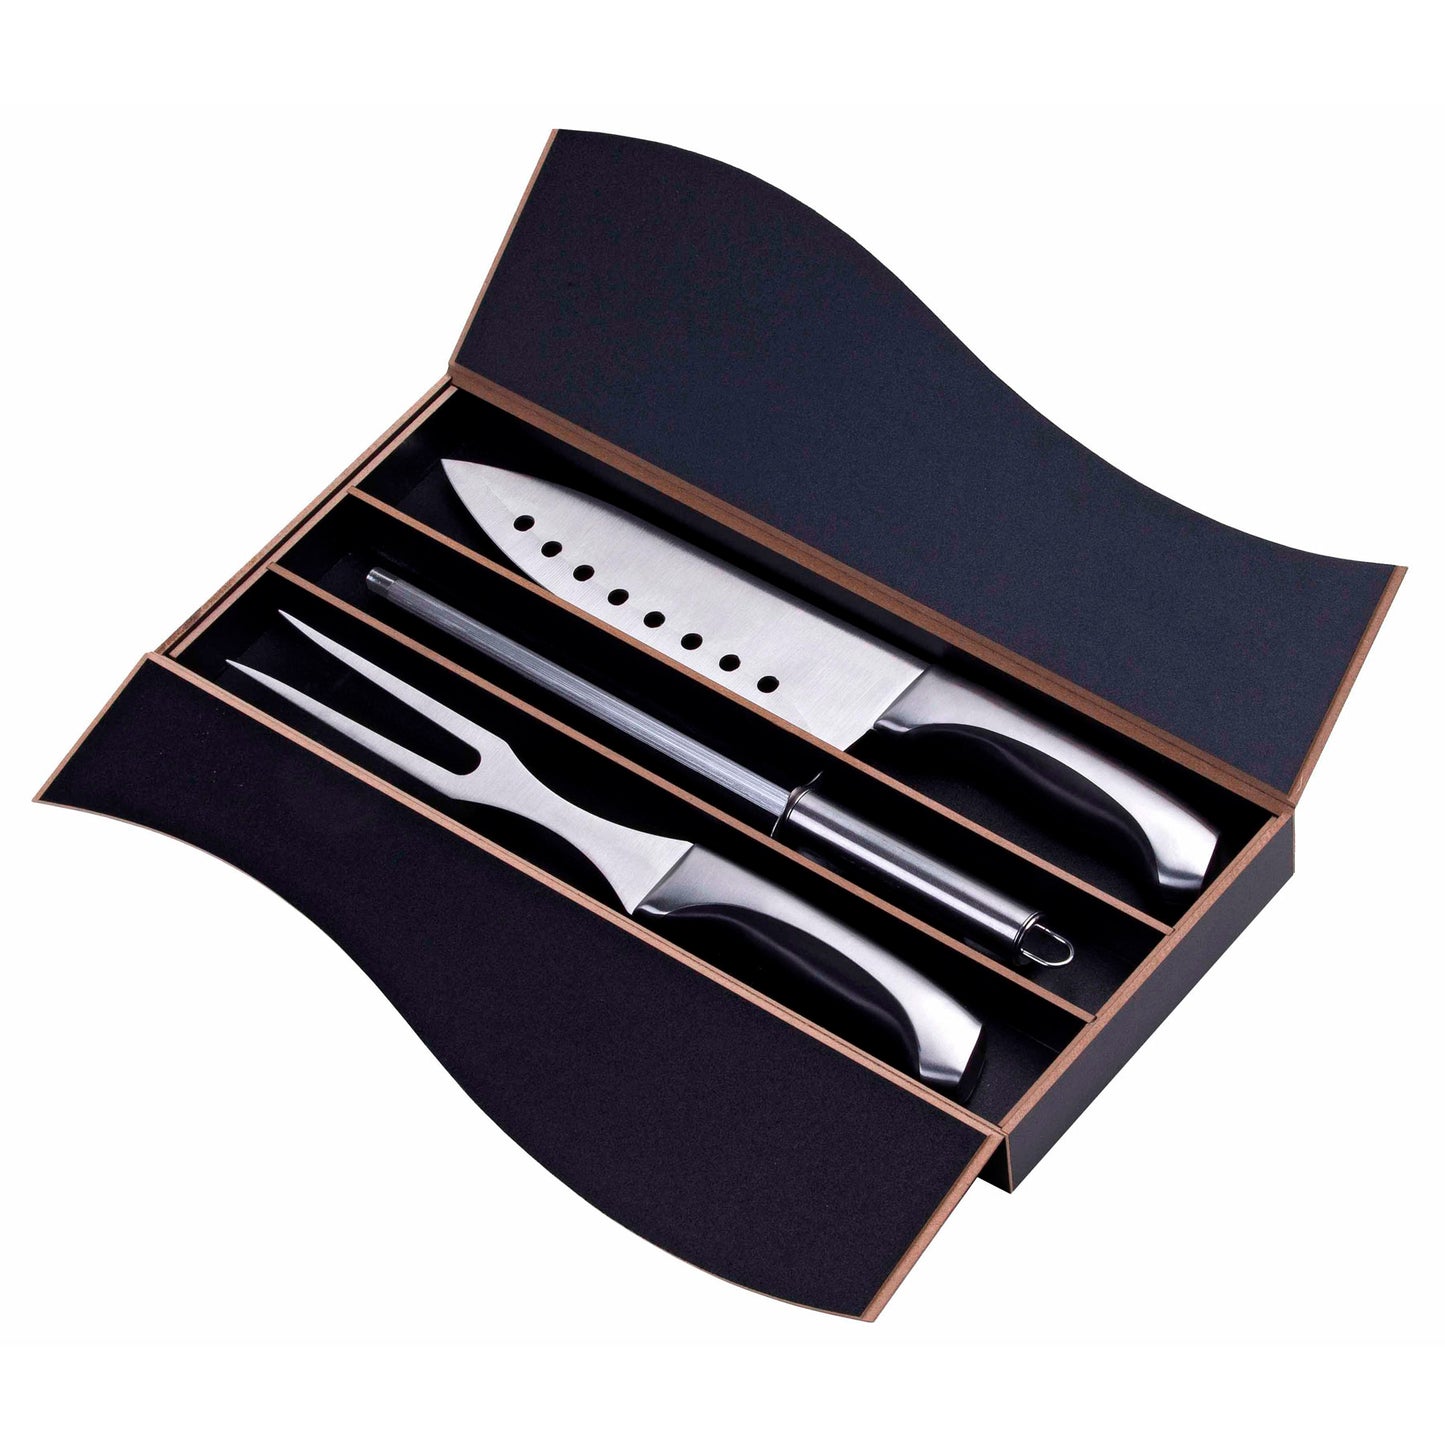 Stainless steel 3 piece carving set with knife, steel and fork in a black moulded box